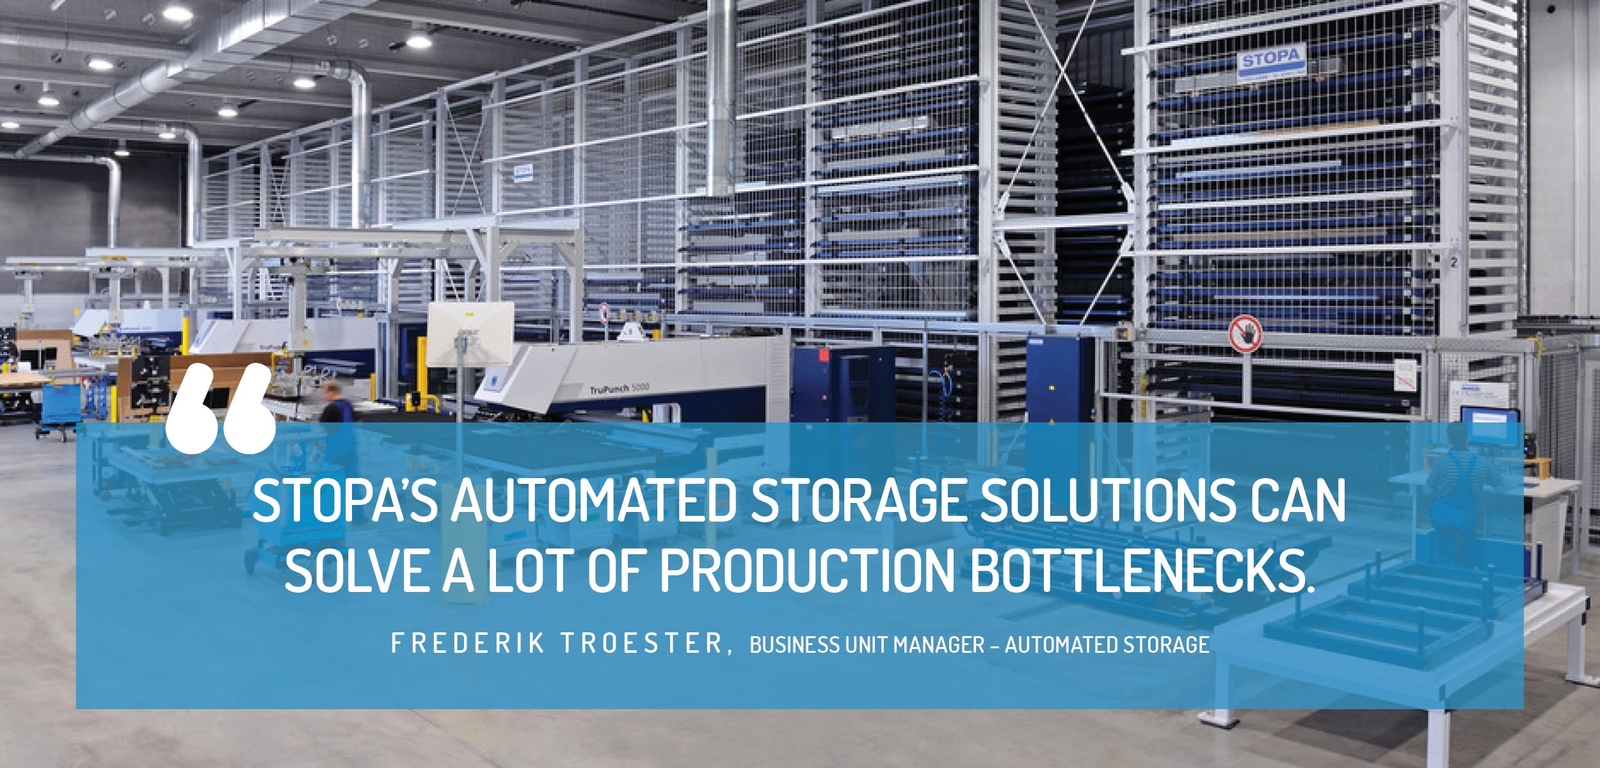 STOPA’s Storage Solutions for Automated Production